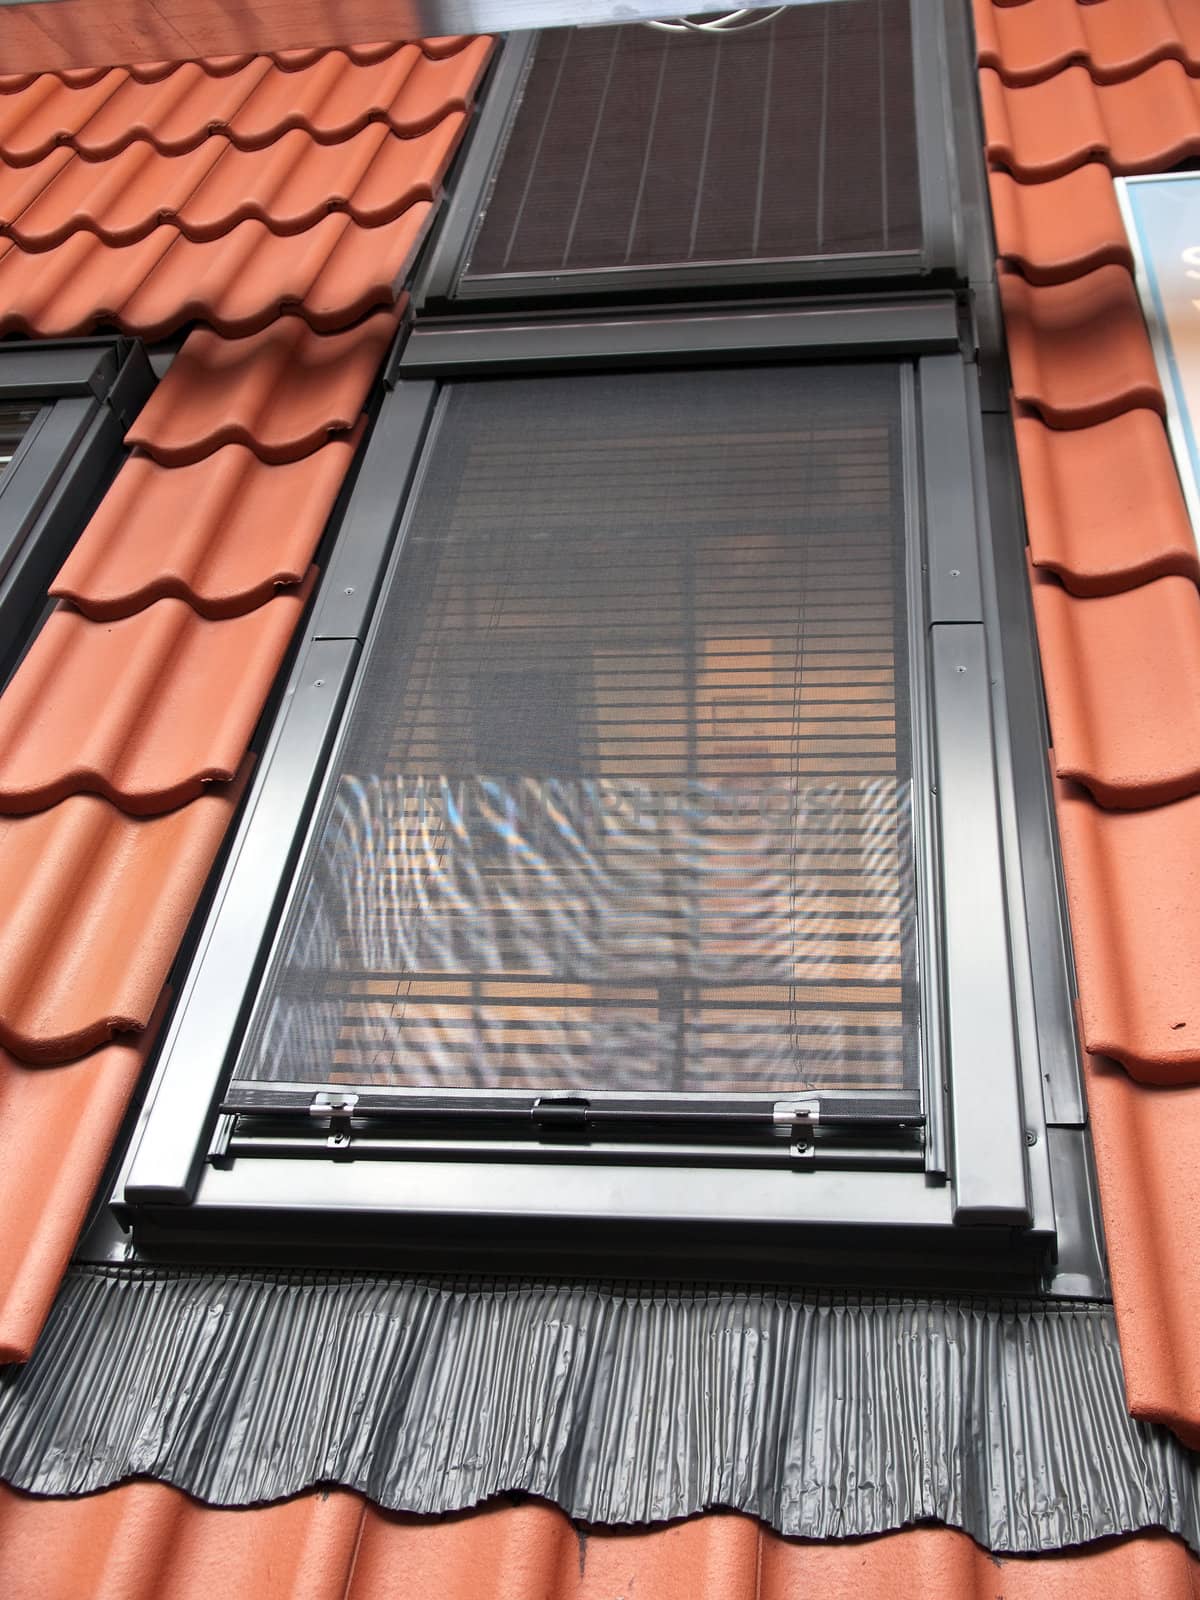 Modern vertical roof window with red tiles